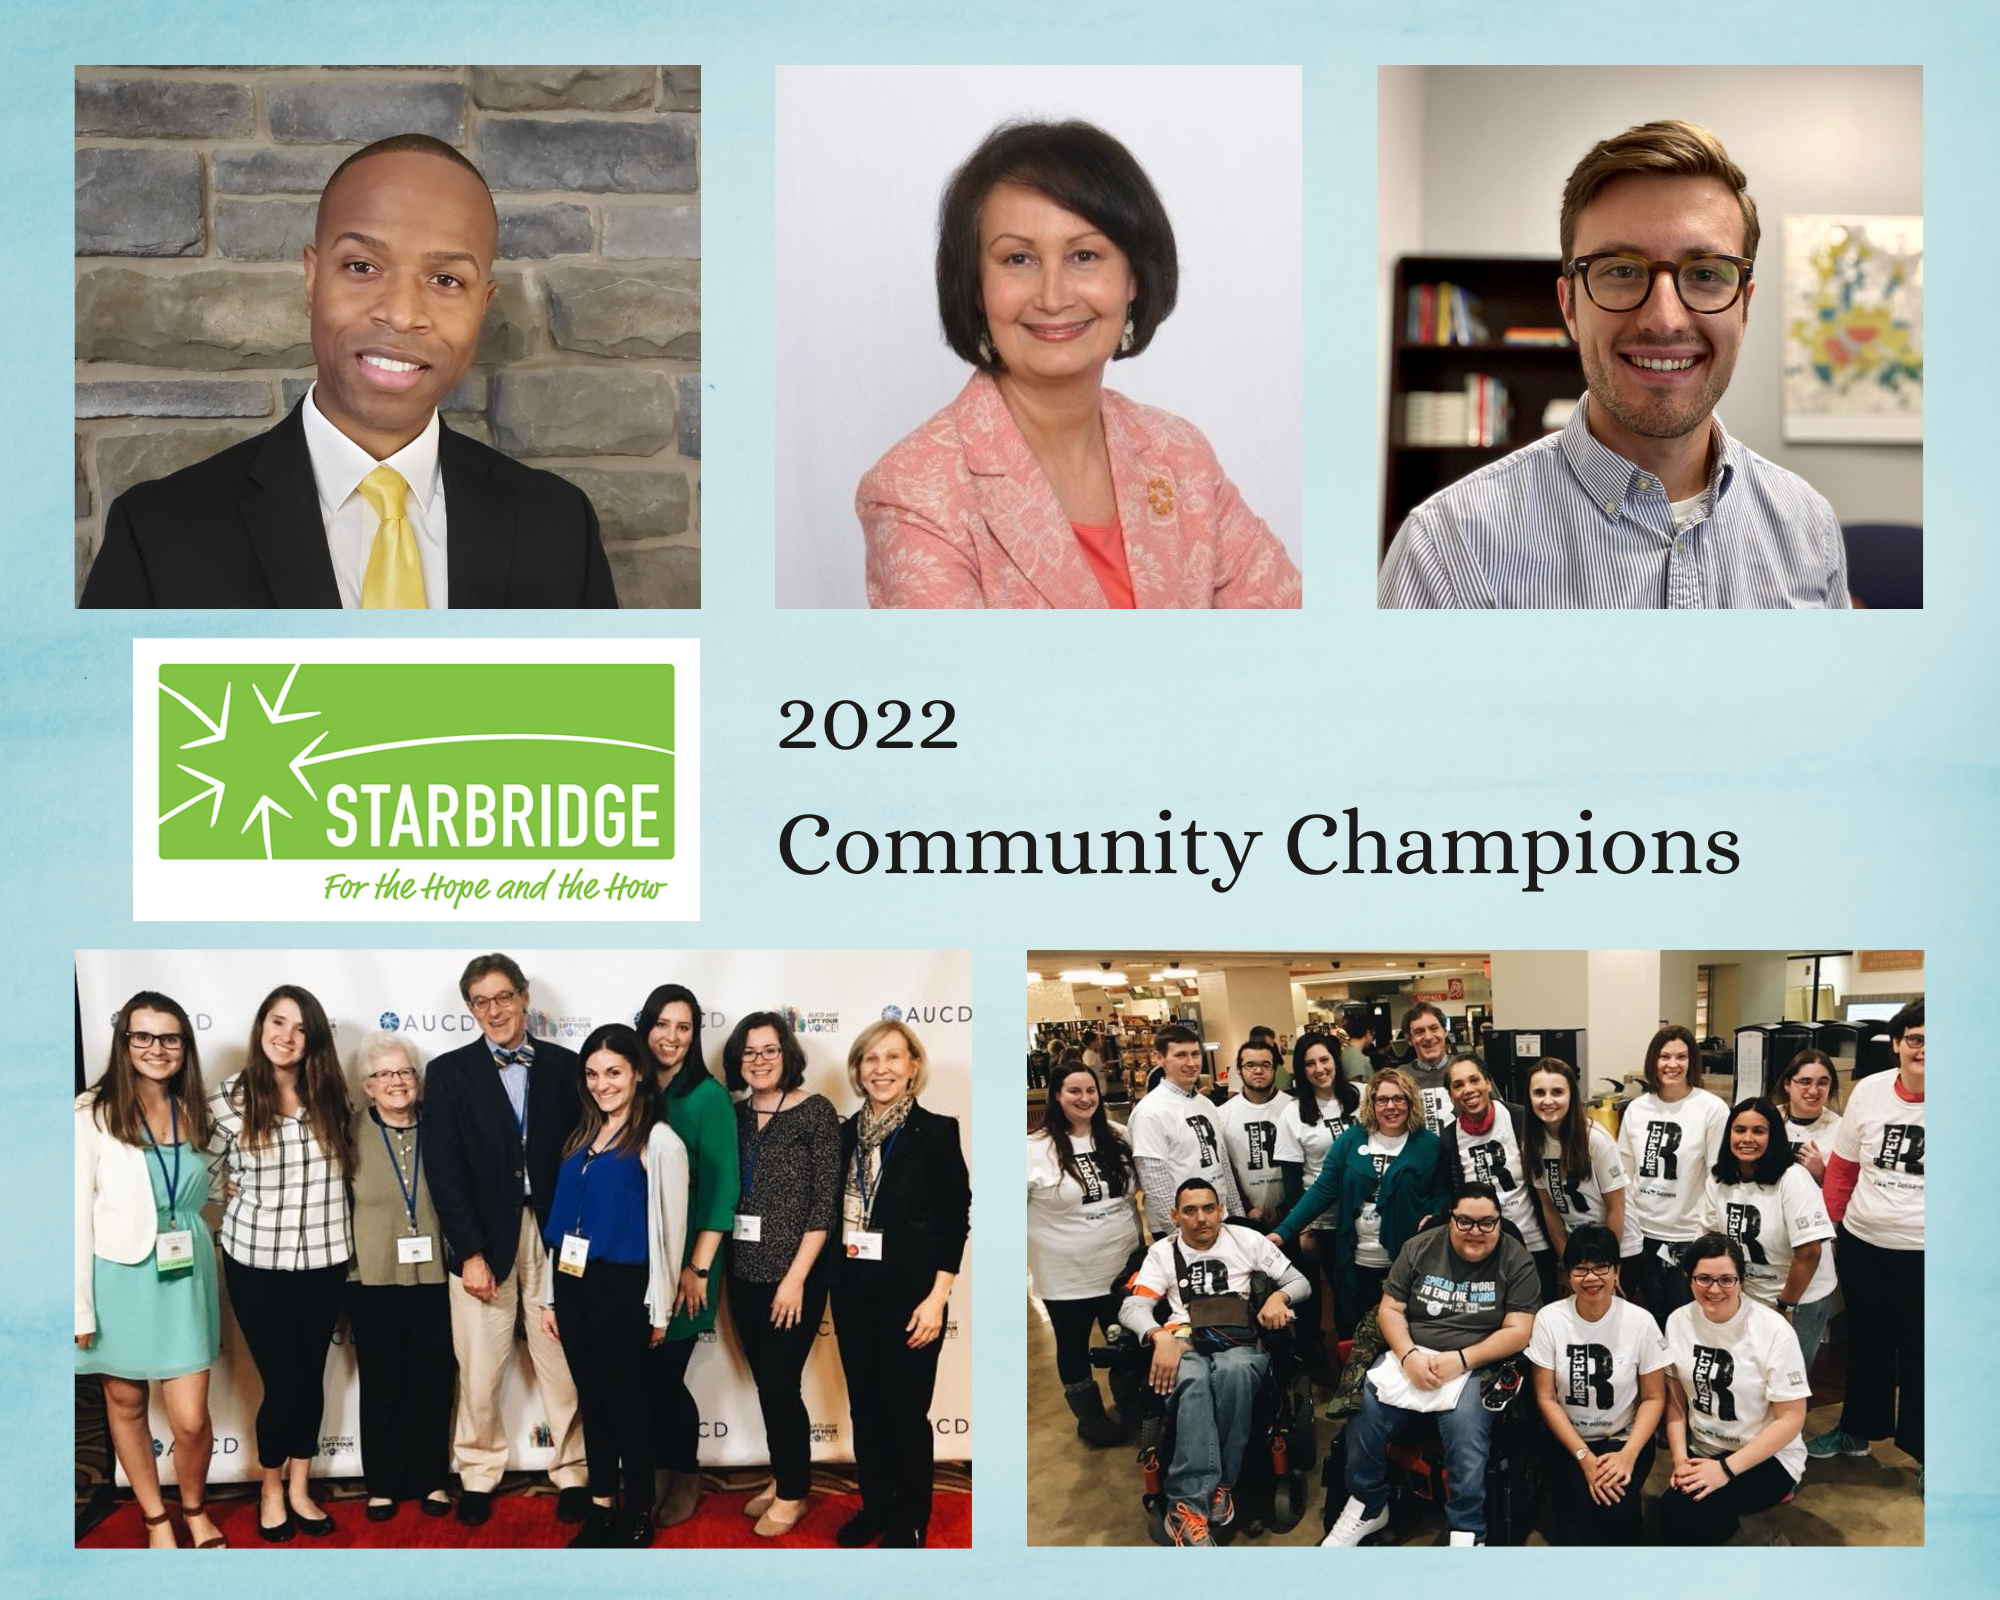 Collage showing diverse group of 2022 Community Champions